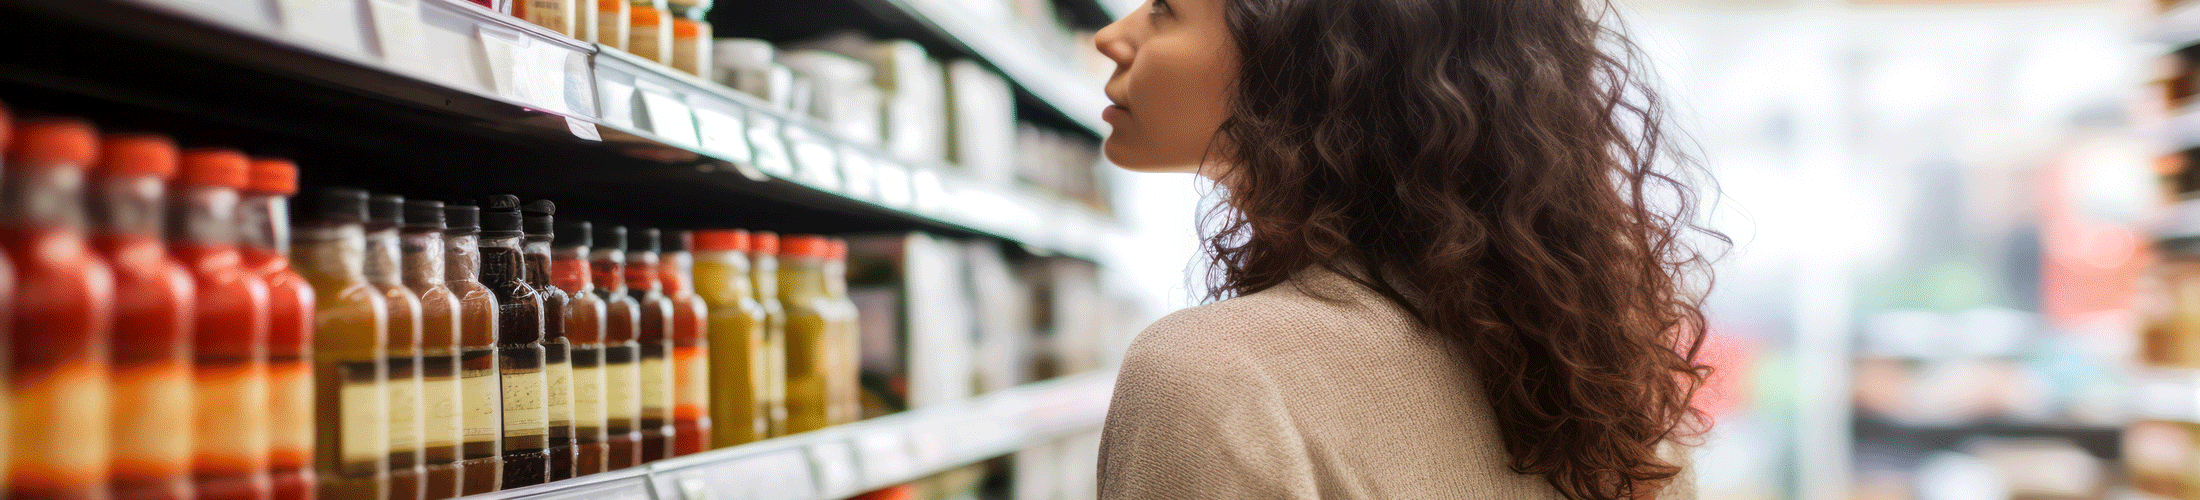 Woman looking at grocery aisle